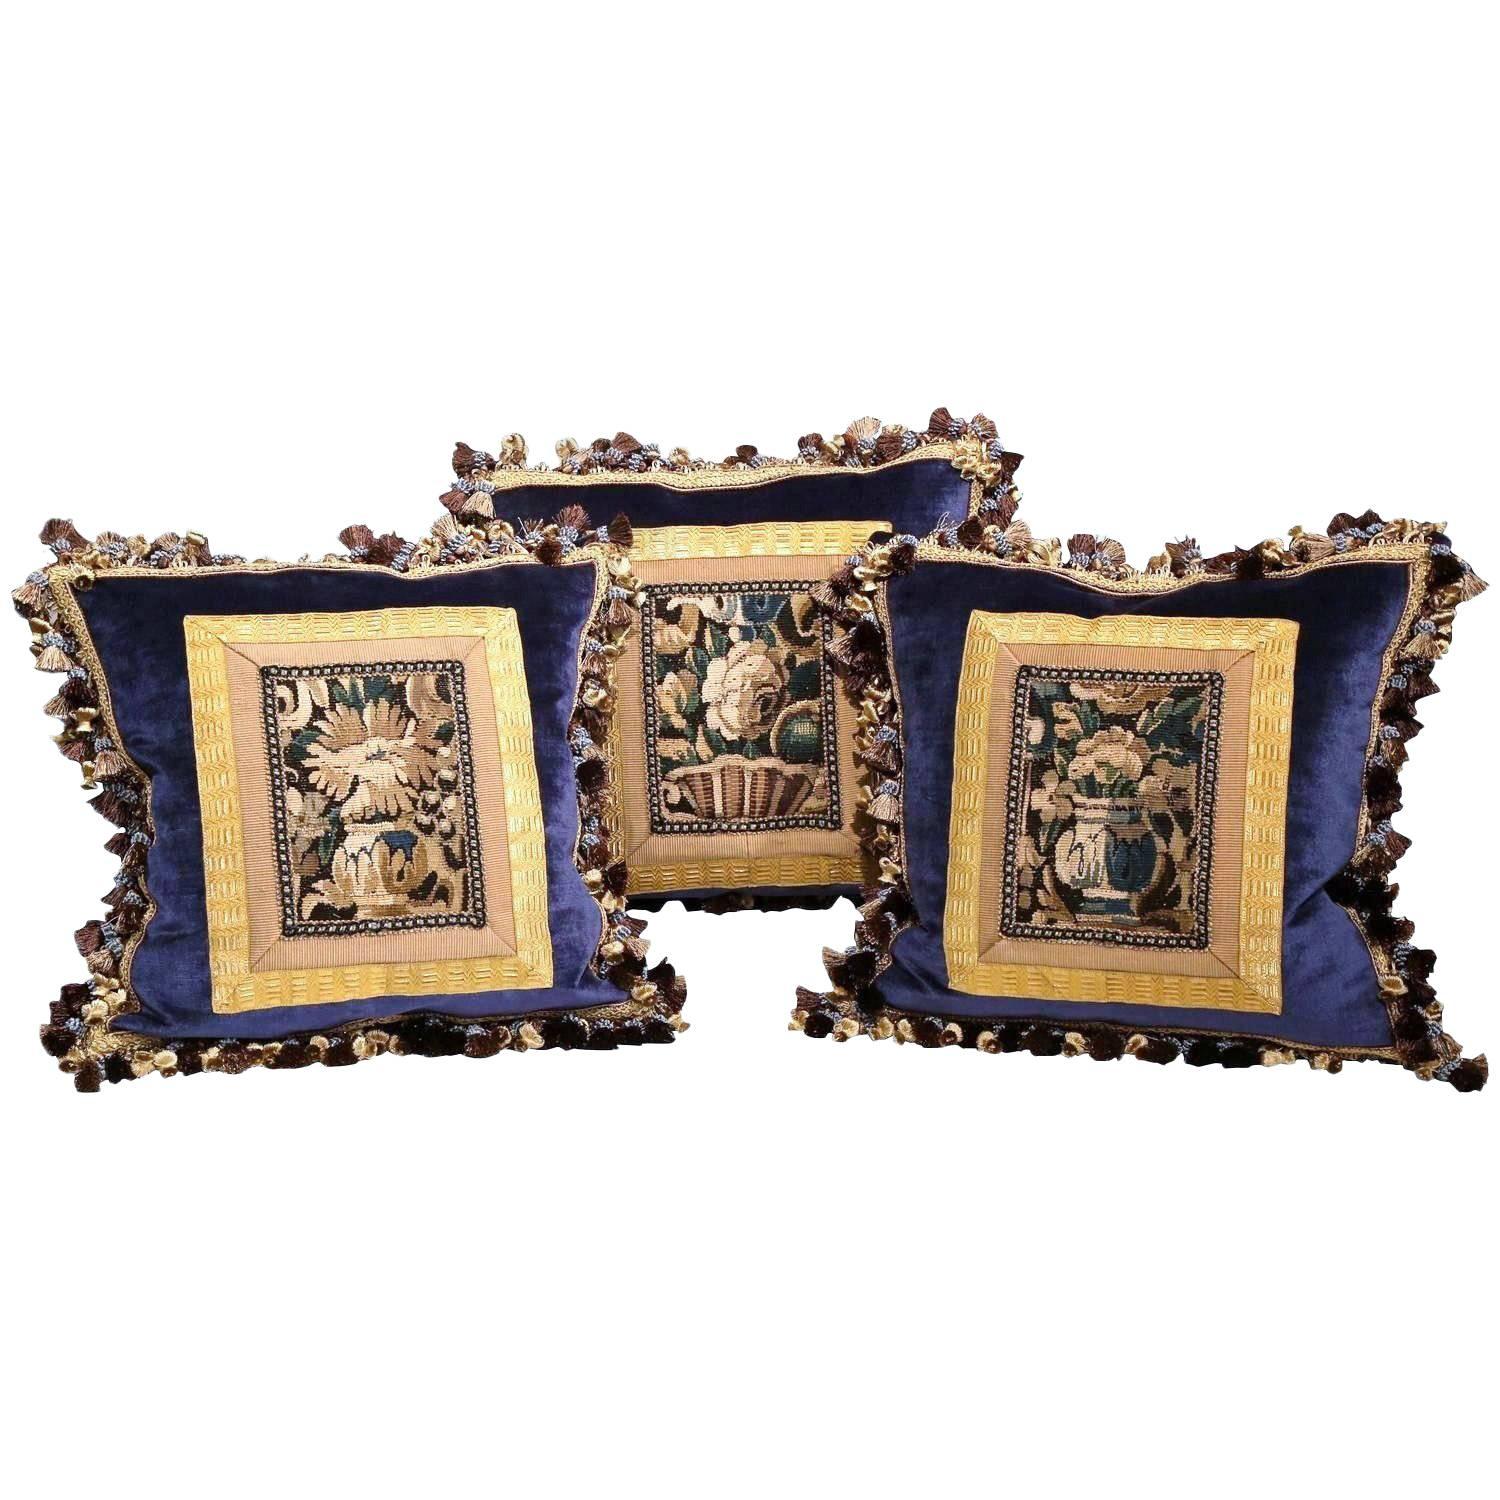 Set of Three Handmade Pillows with Aubusson Tapestry and Antique Trims